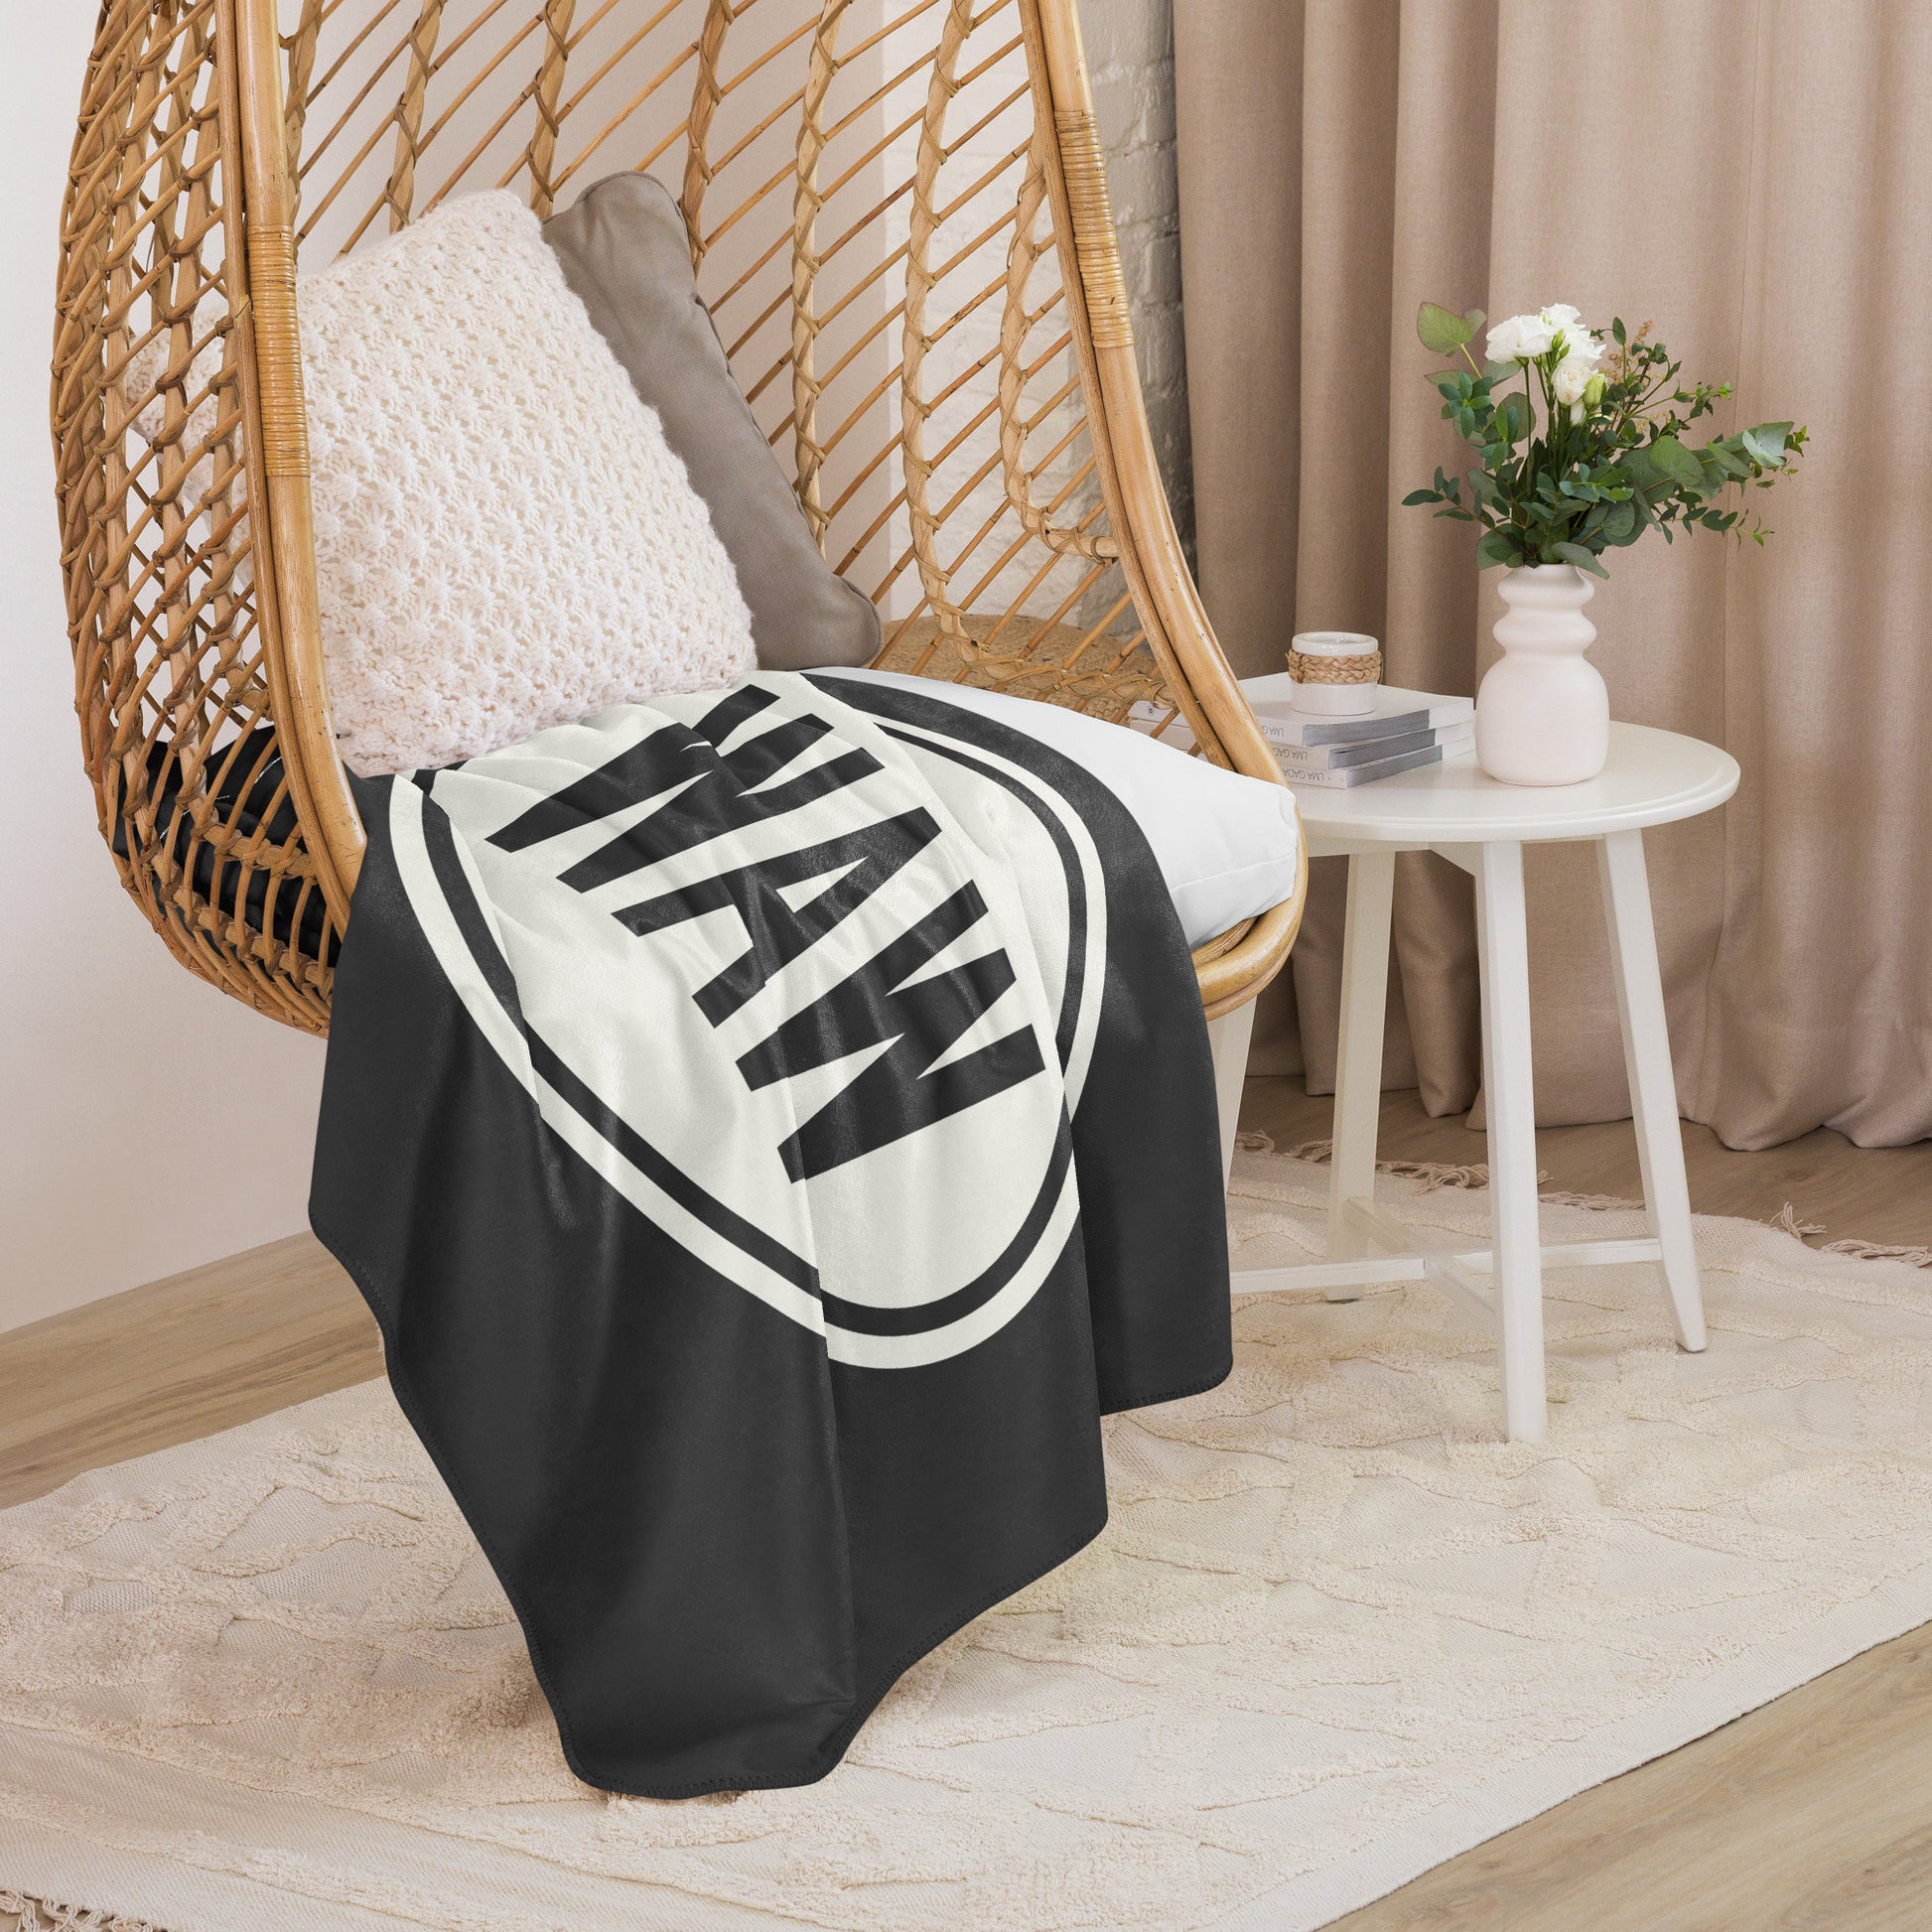 Unique Travel Gift Sherpa Blanket - White Oval • WAW Warsaw • YHM Designs - Image 06